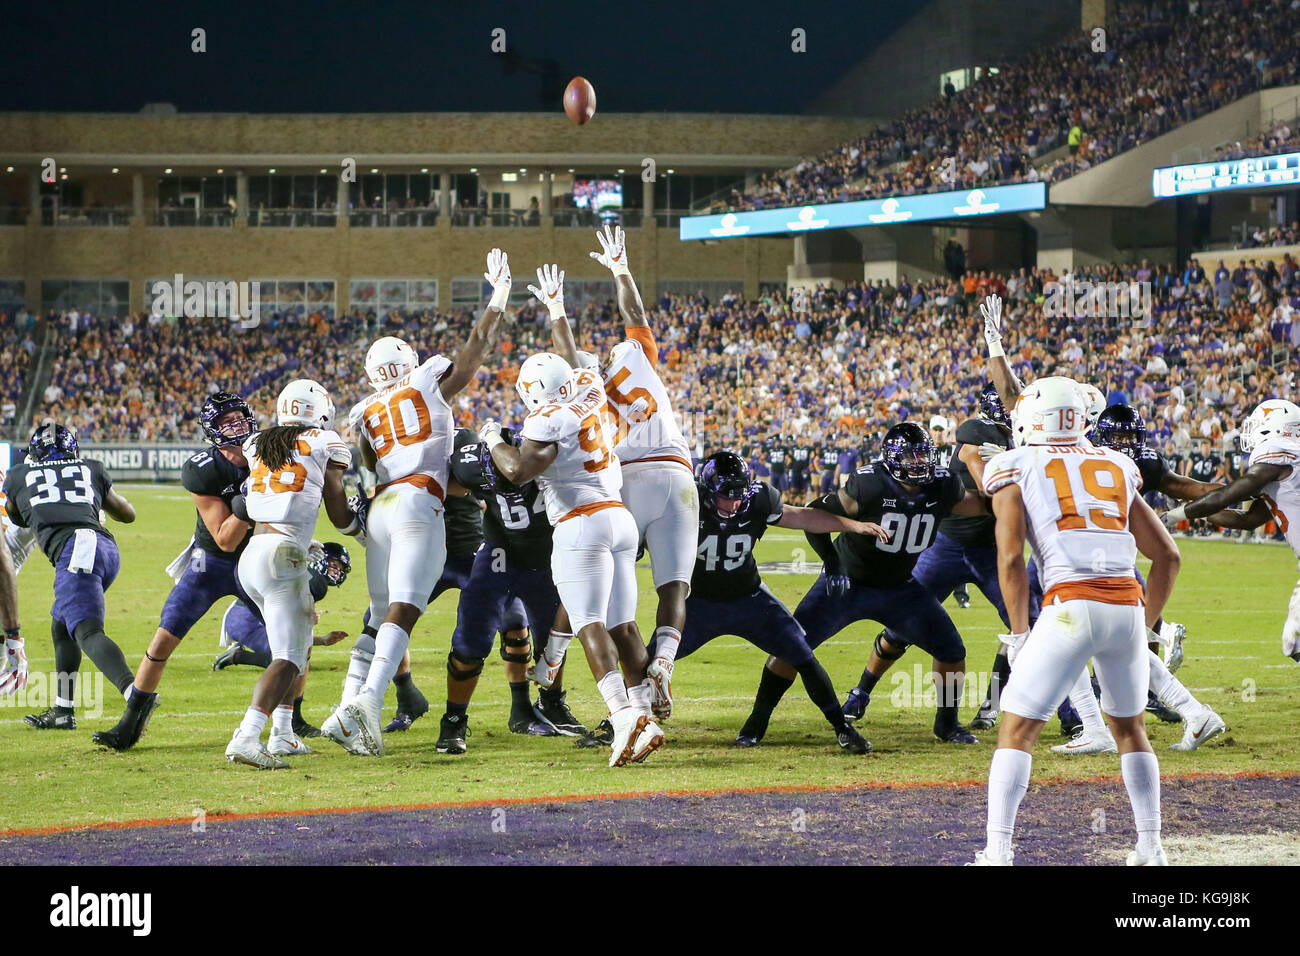 Fort Worth, Texas, USA. 4th Nov, 2017. University of Texas DL Charles Omenihu (90) and University of Texas DL Chris Nelson (97) and University of Texas DL Poona Ford (95) attempt to block and extra point try during the game between The University of Texas and Texas Christian University at Amon G. Carter Stadium in Fort Worth, Texas. Tom Sooter/CSM/Alamy Live News Stock Photo